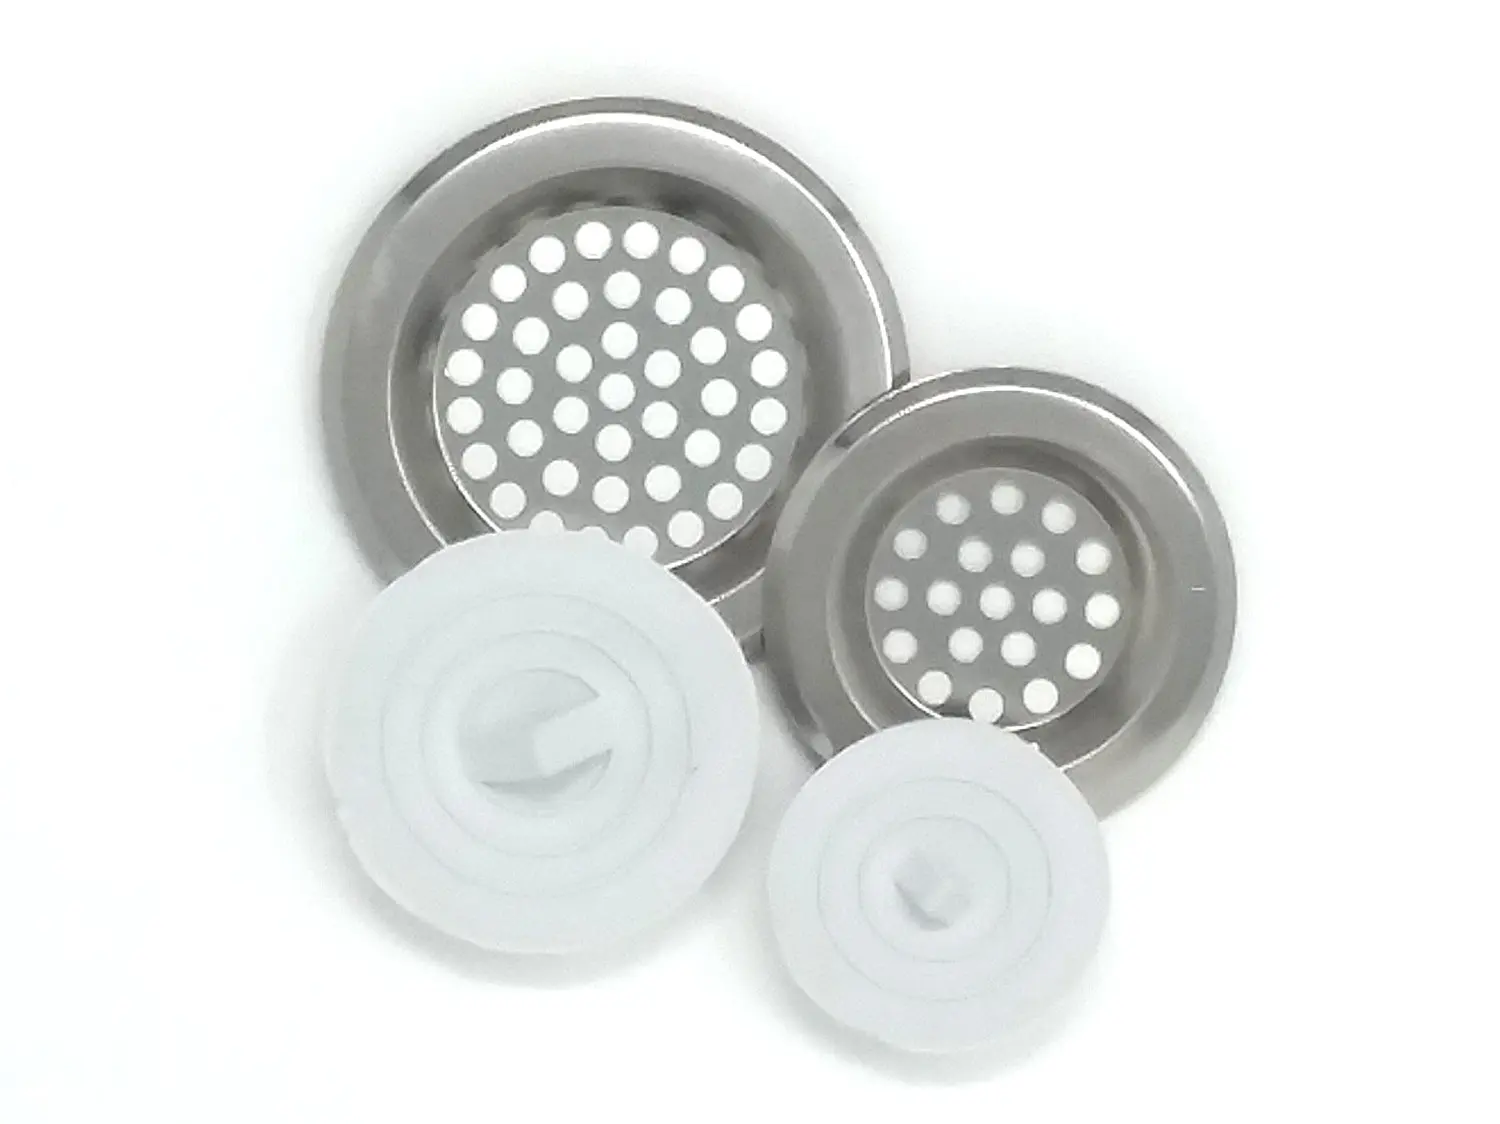 Cheap Sink Stoppers Strainers Find Sink Stoppers Strainers